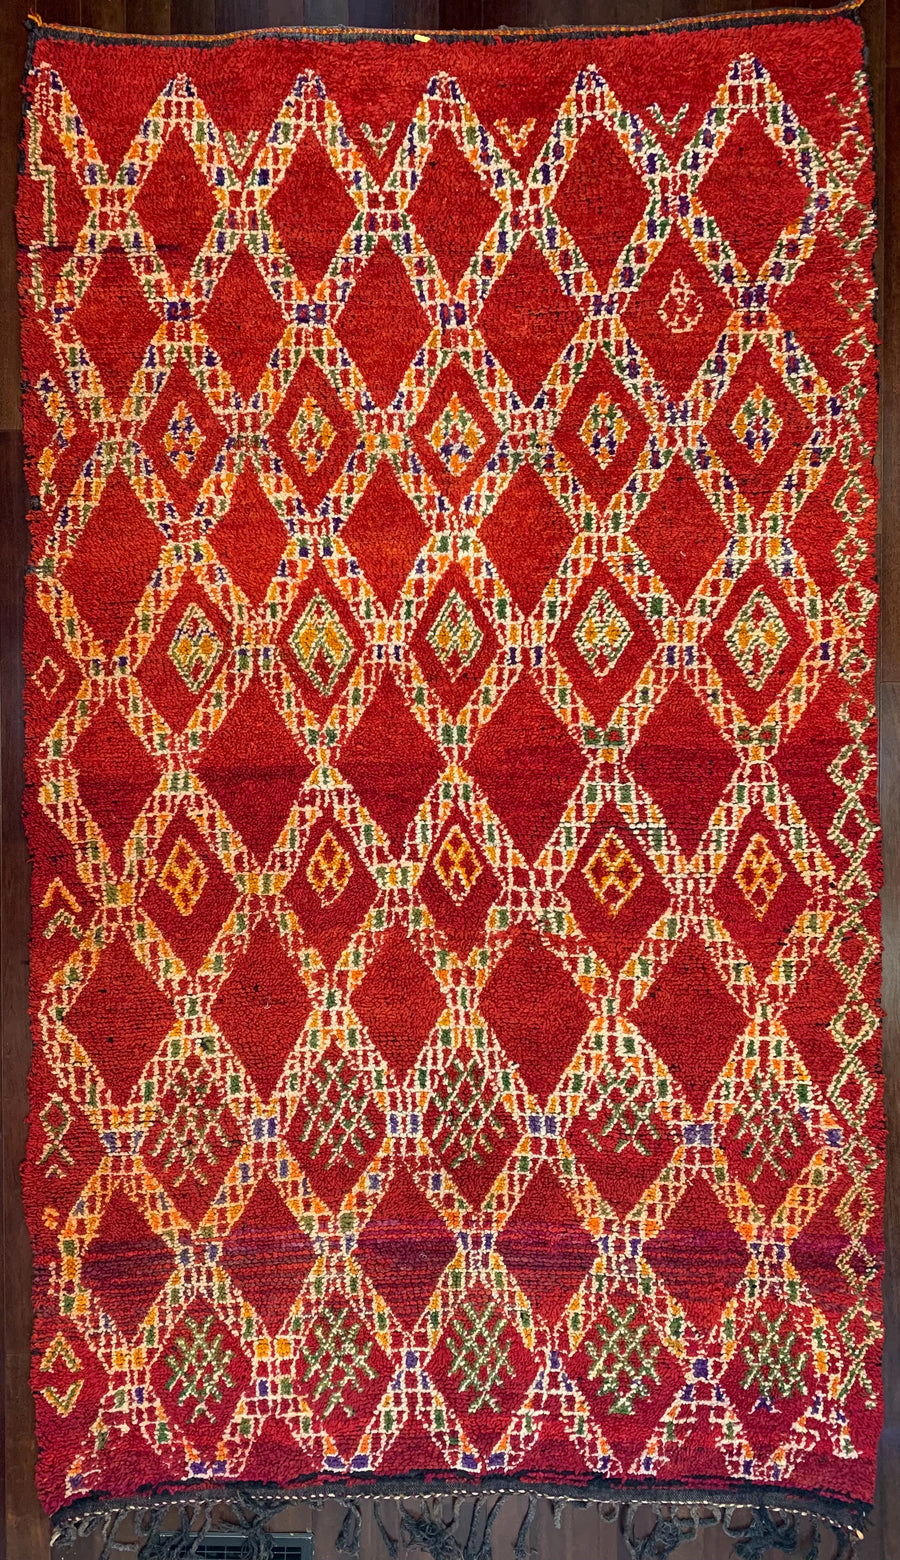 Clearance! Vintage 6x10 Moroccan Shag Rug with Red Diamond Pattern